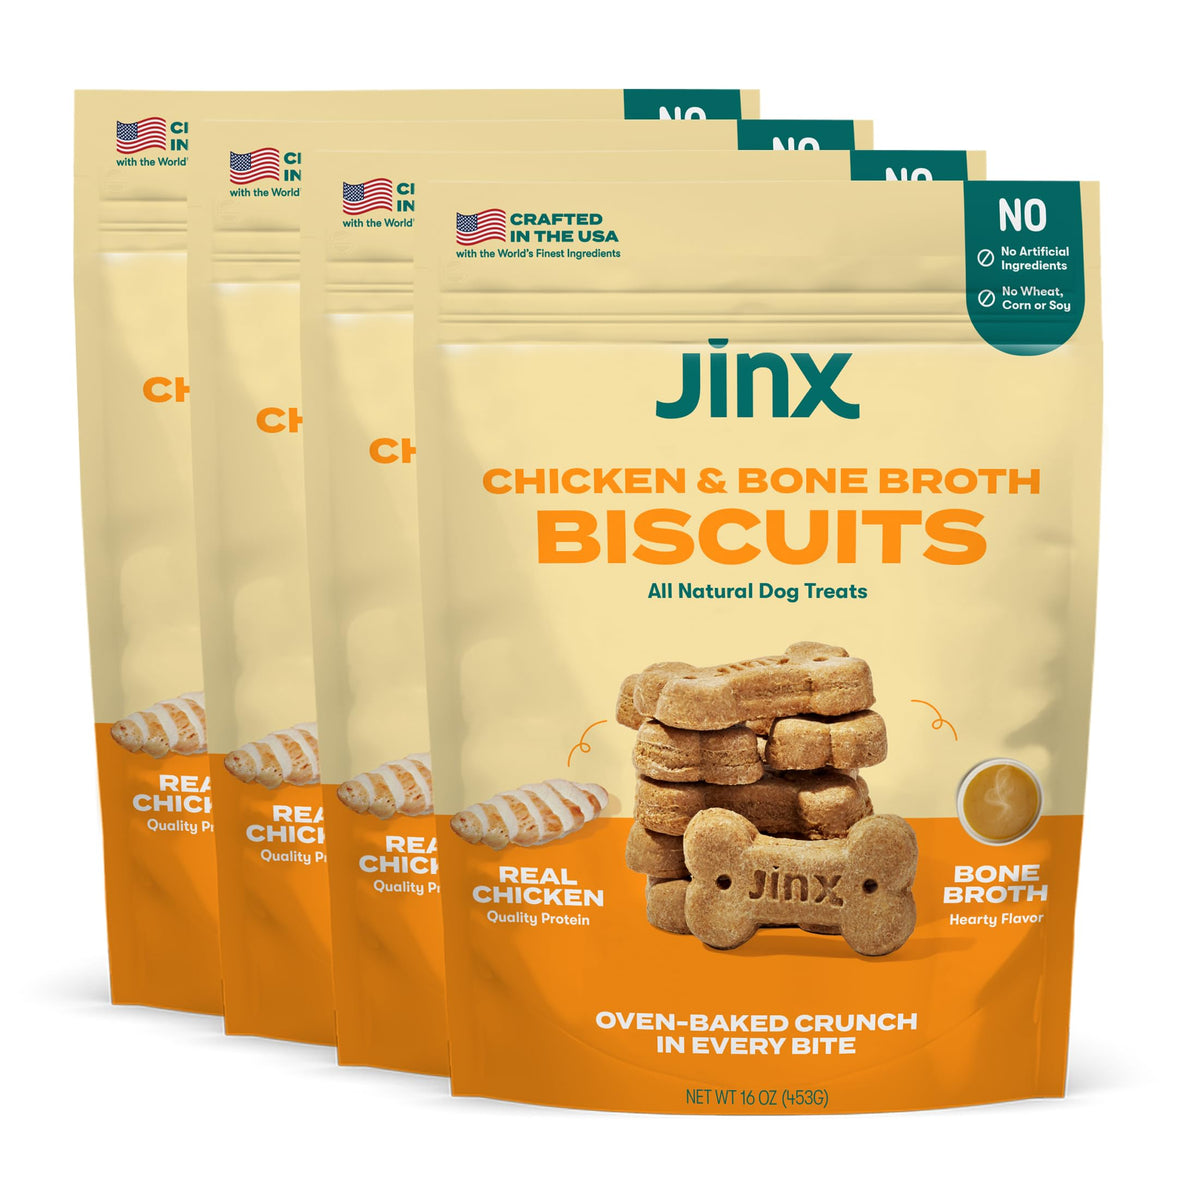 Jinx Chicken Bone Broth Biscuits Natural Crunchy Dry Dog Treats - Made with Oven-Baked Real Chicken & Bone Broth, for Puppies, Adult, and Senior Dogs, 4-Pack, 16 oz. Bag Value Pack